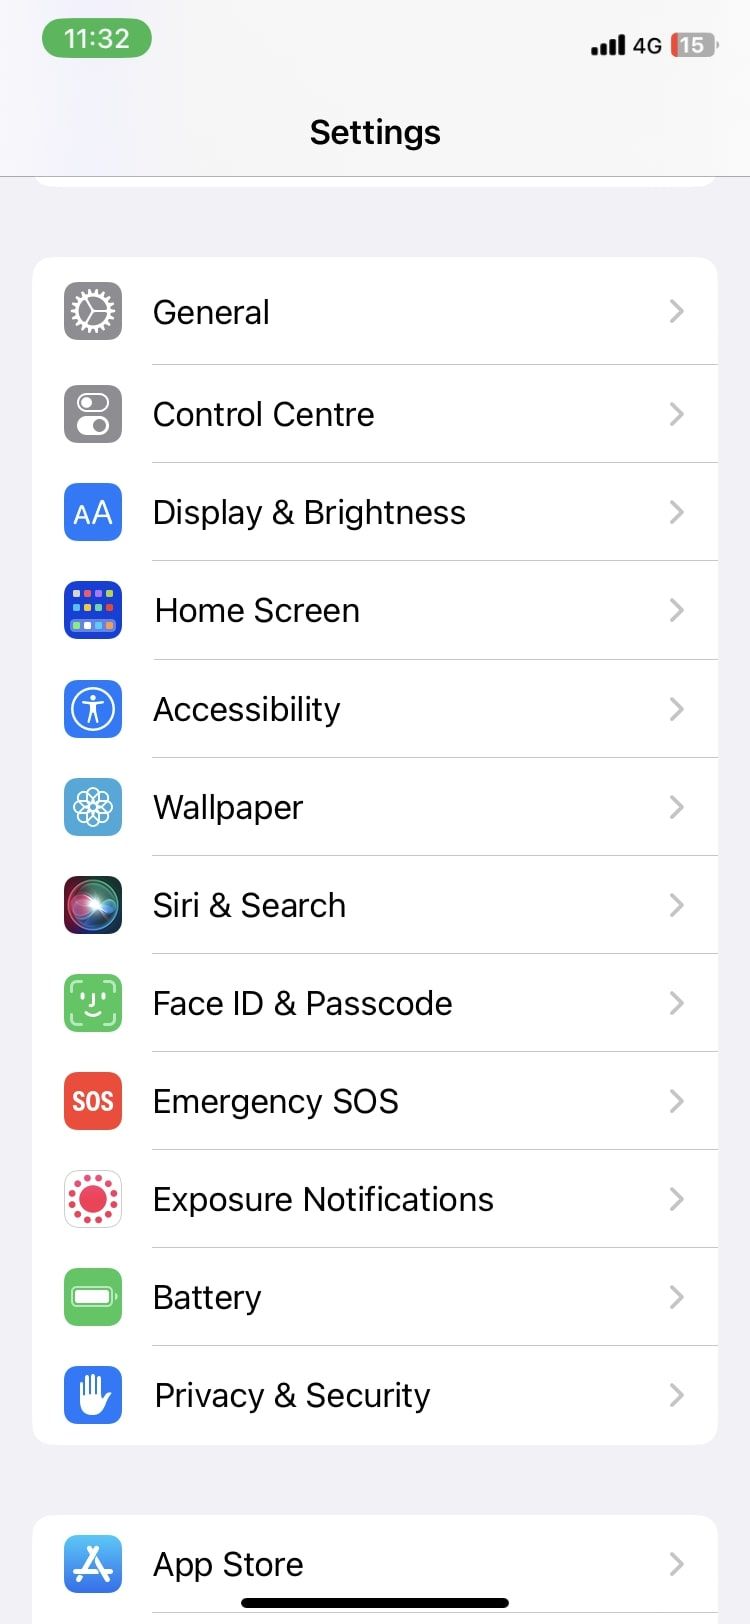 accessibility in iPhone settings